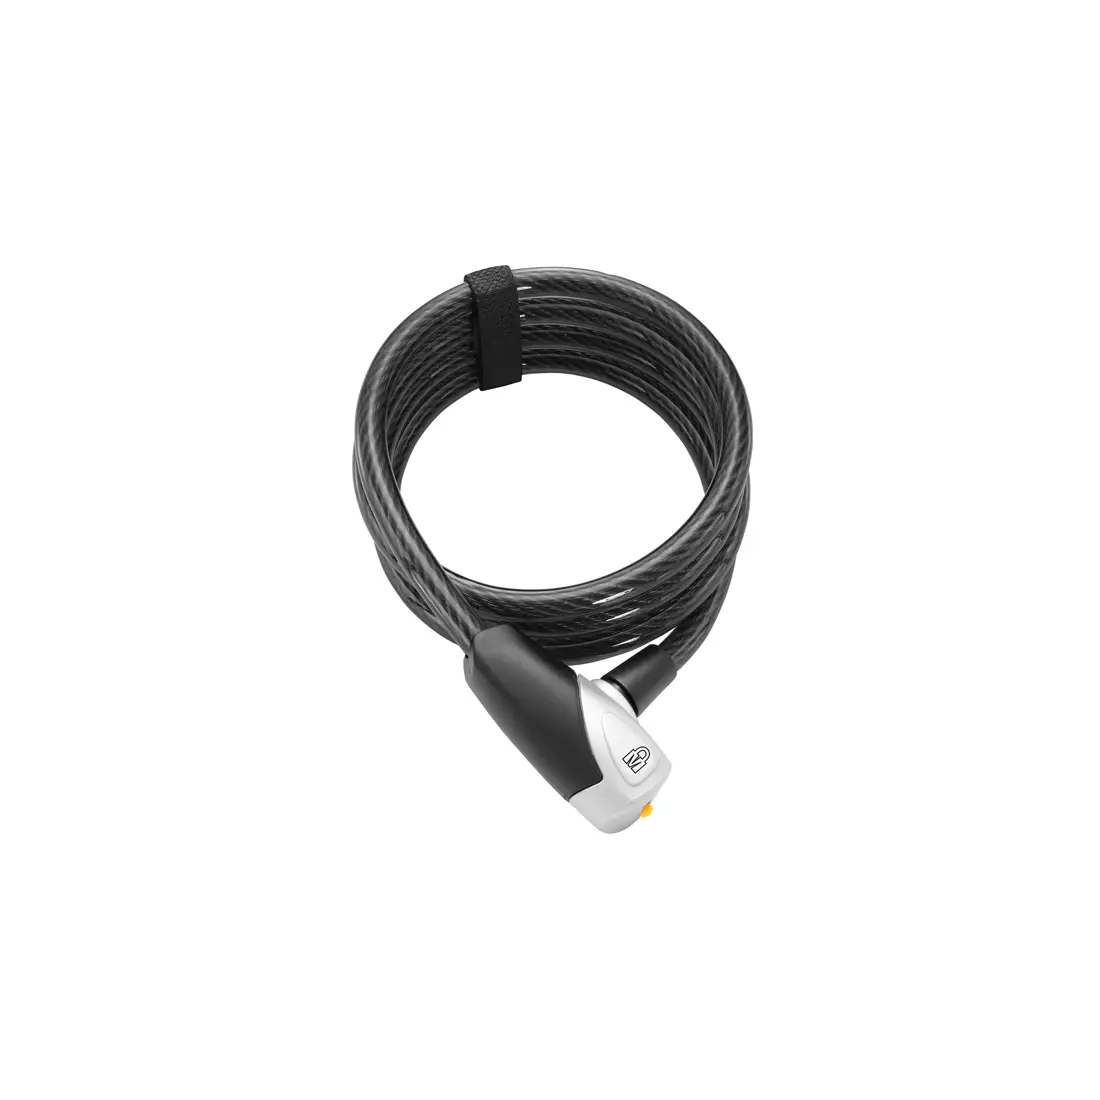 MAGNUM bicycle lock cord 180cm 5 keys with a code black MGN-3025